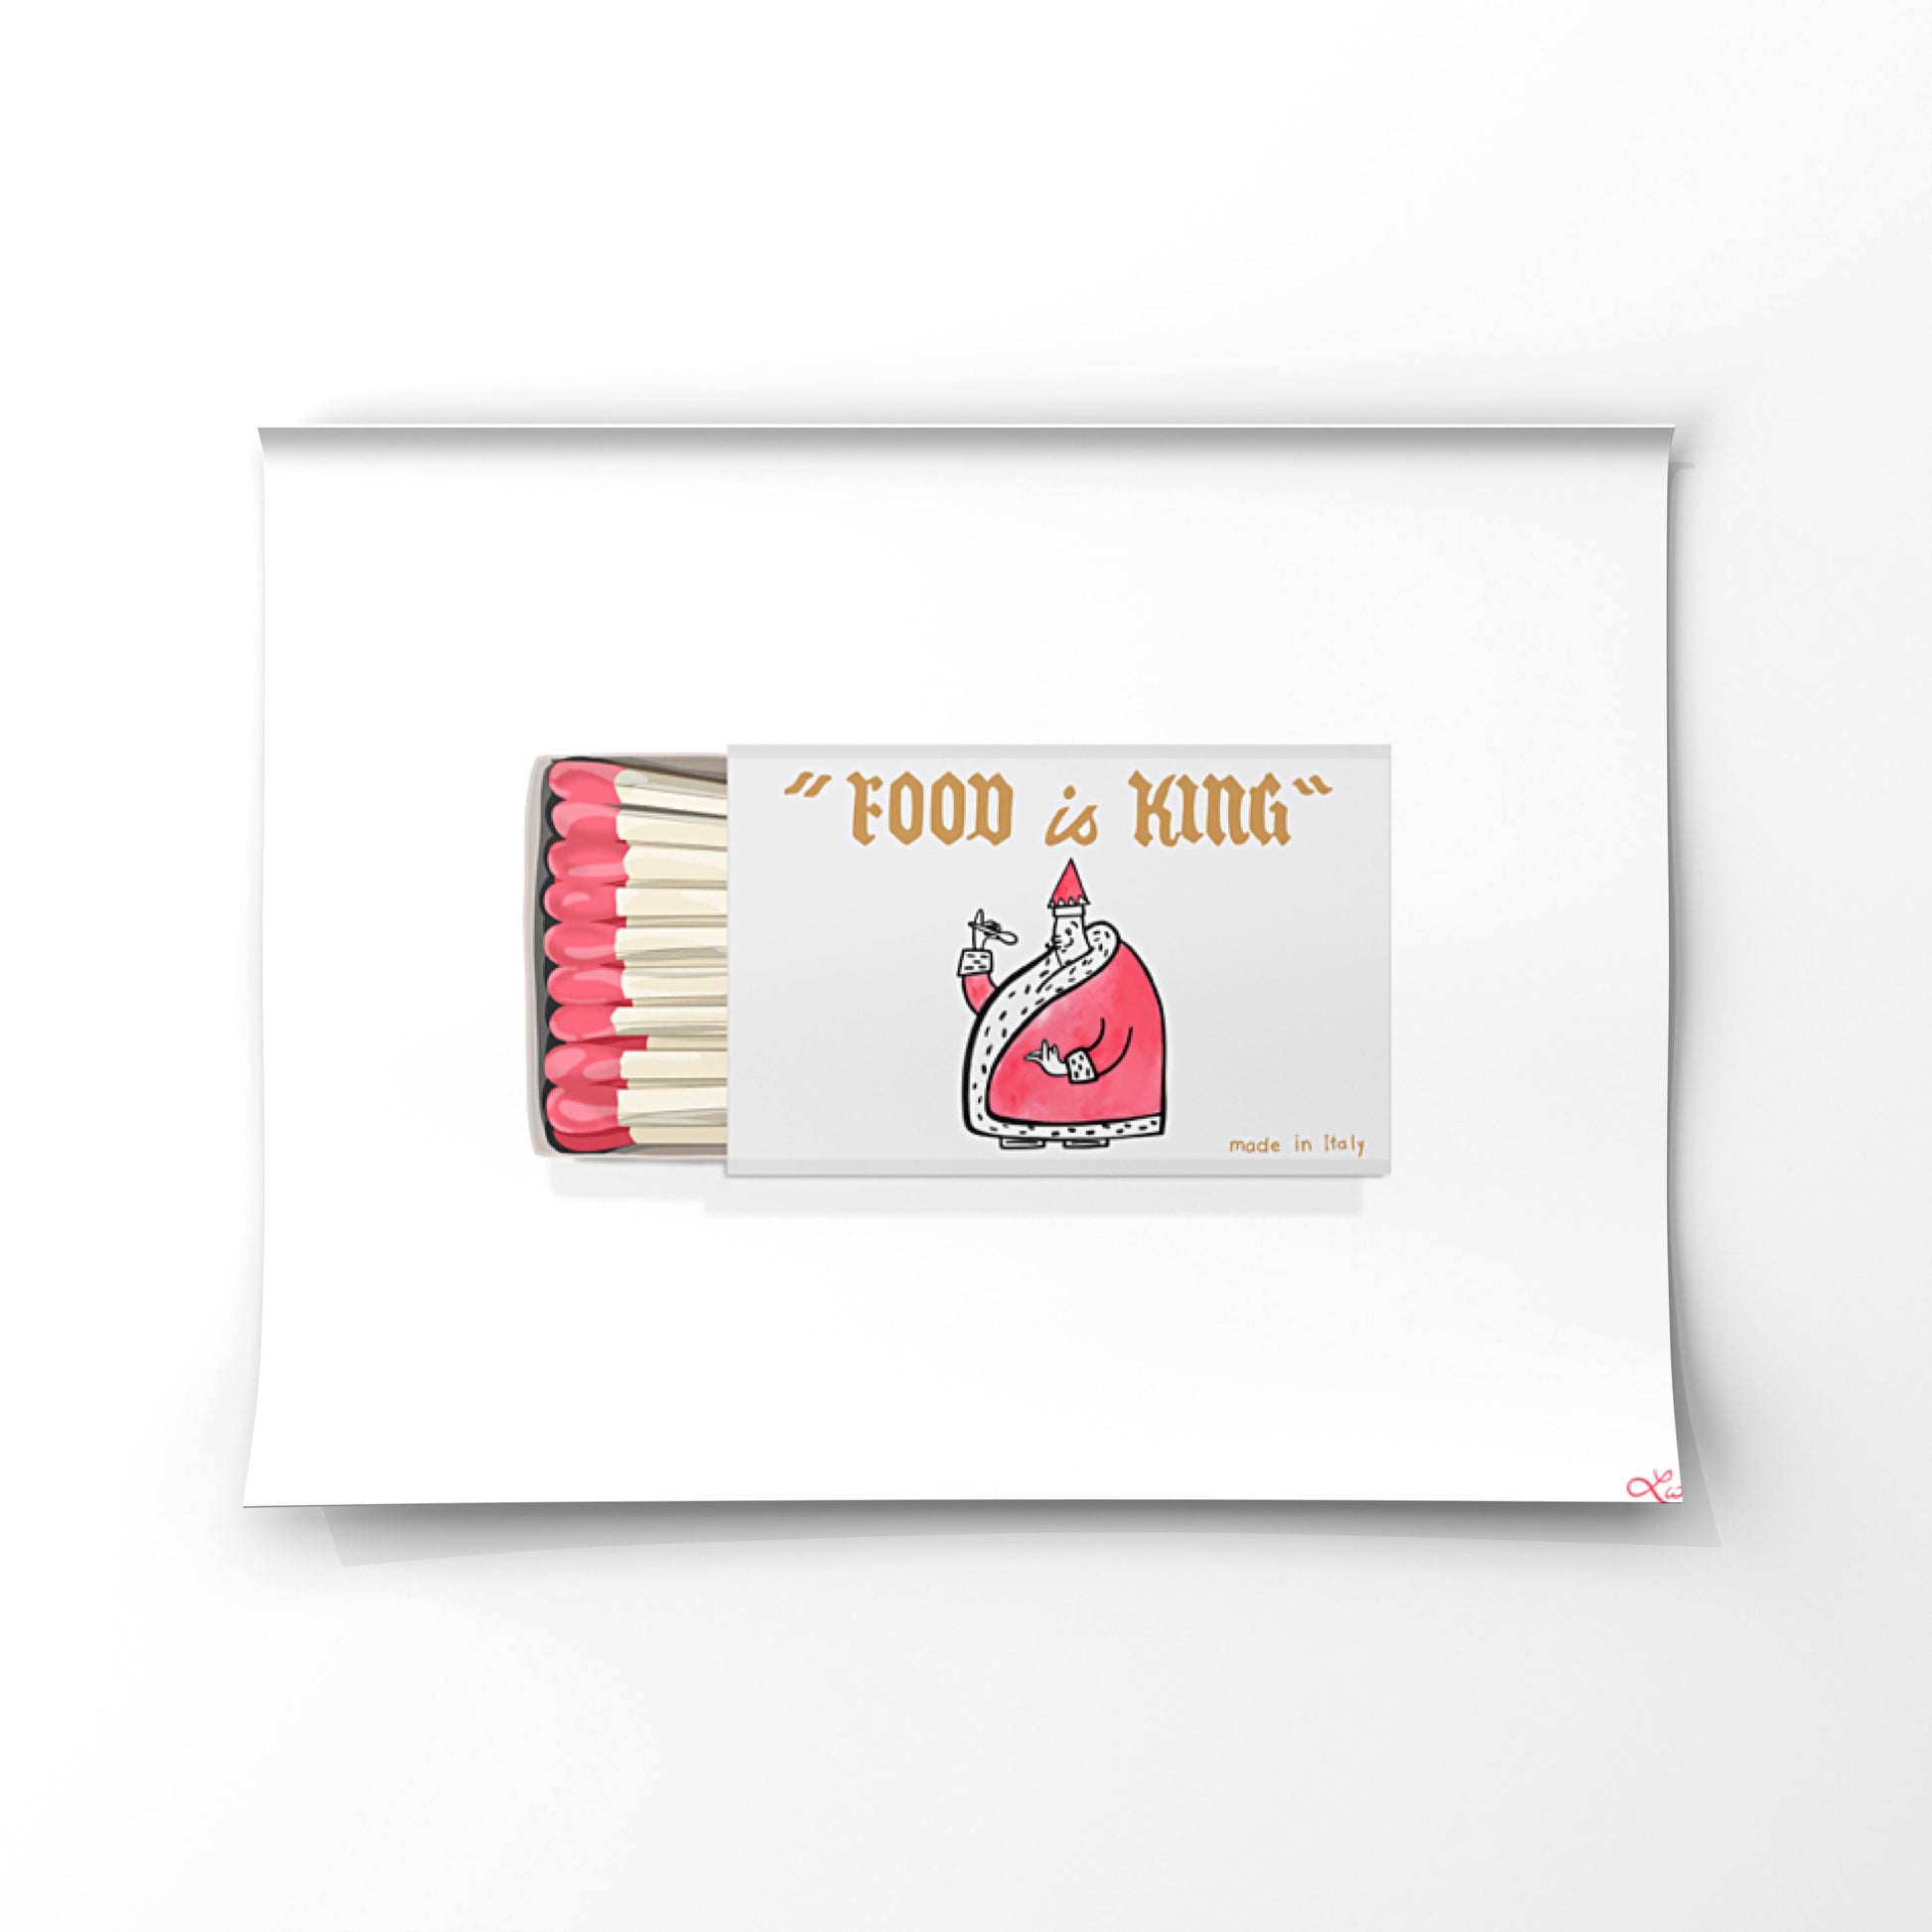 Food is king... and we tend to agree!  This is a watercolor style illustration of the Brown Palace Hotel Matchbook that says food is king. A drawing of a white matchbook with pink little match heads sticking out of the box - in the bottom right corner of the matchbox it says "Made in Italy". We hope you enjoy your new artwork!